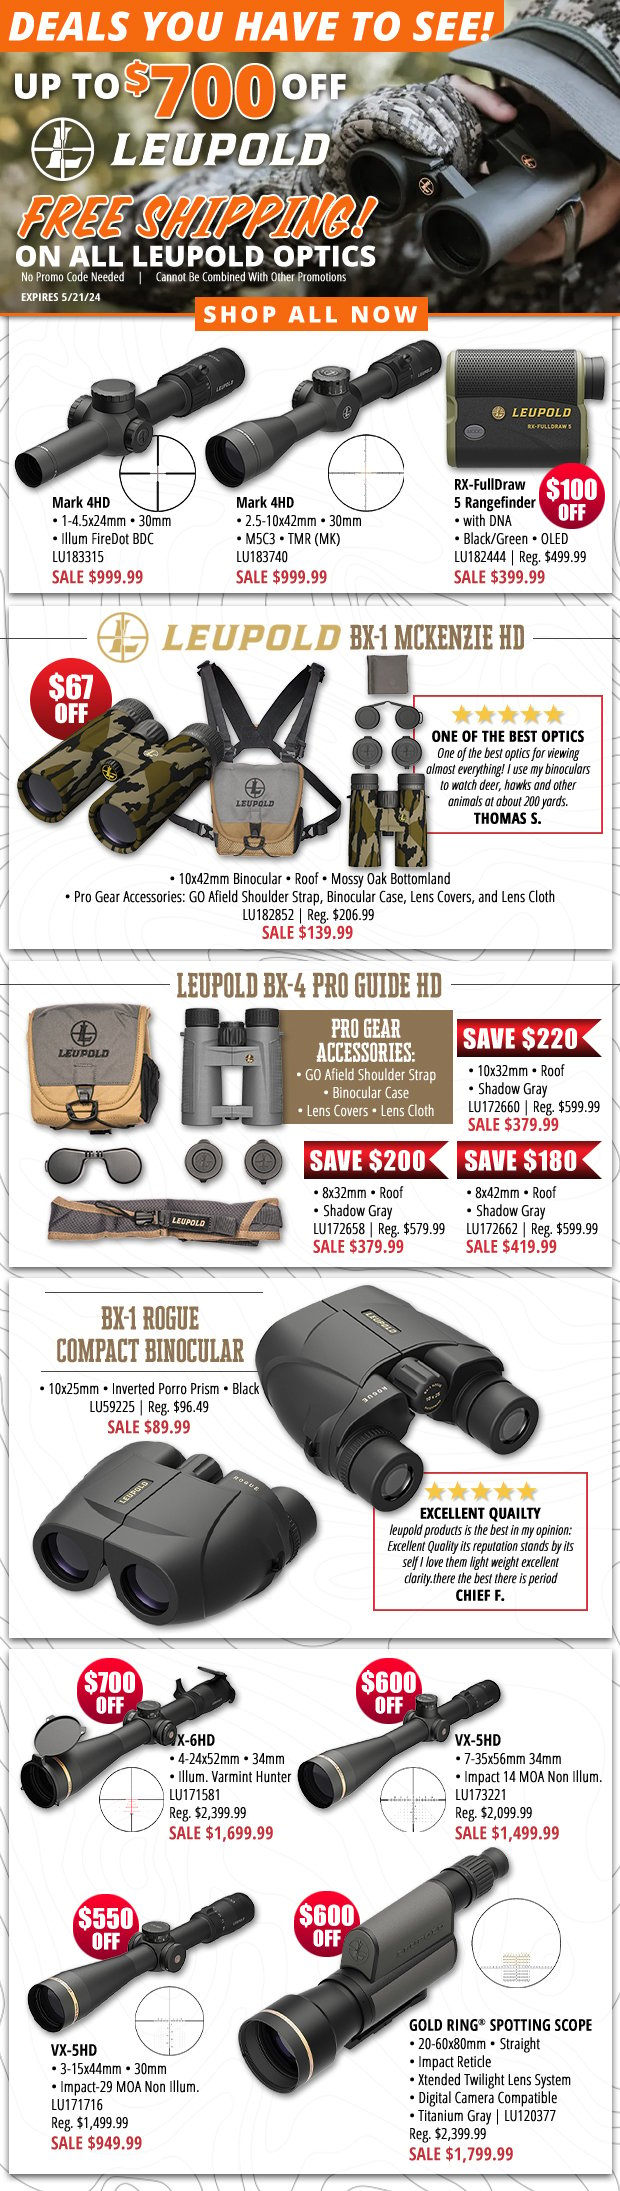 Up to $700 Off Select Top Leupold Gear with Free Shipping on All Leupold Optics No Promo Code Needed